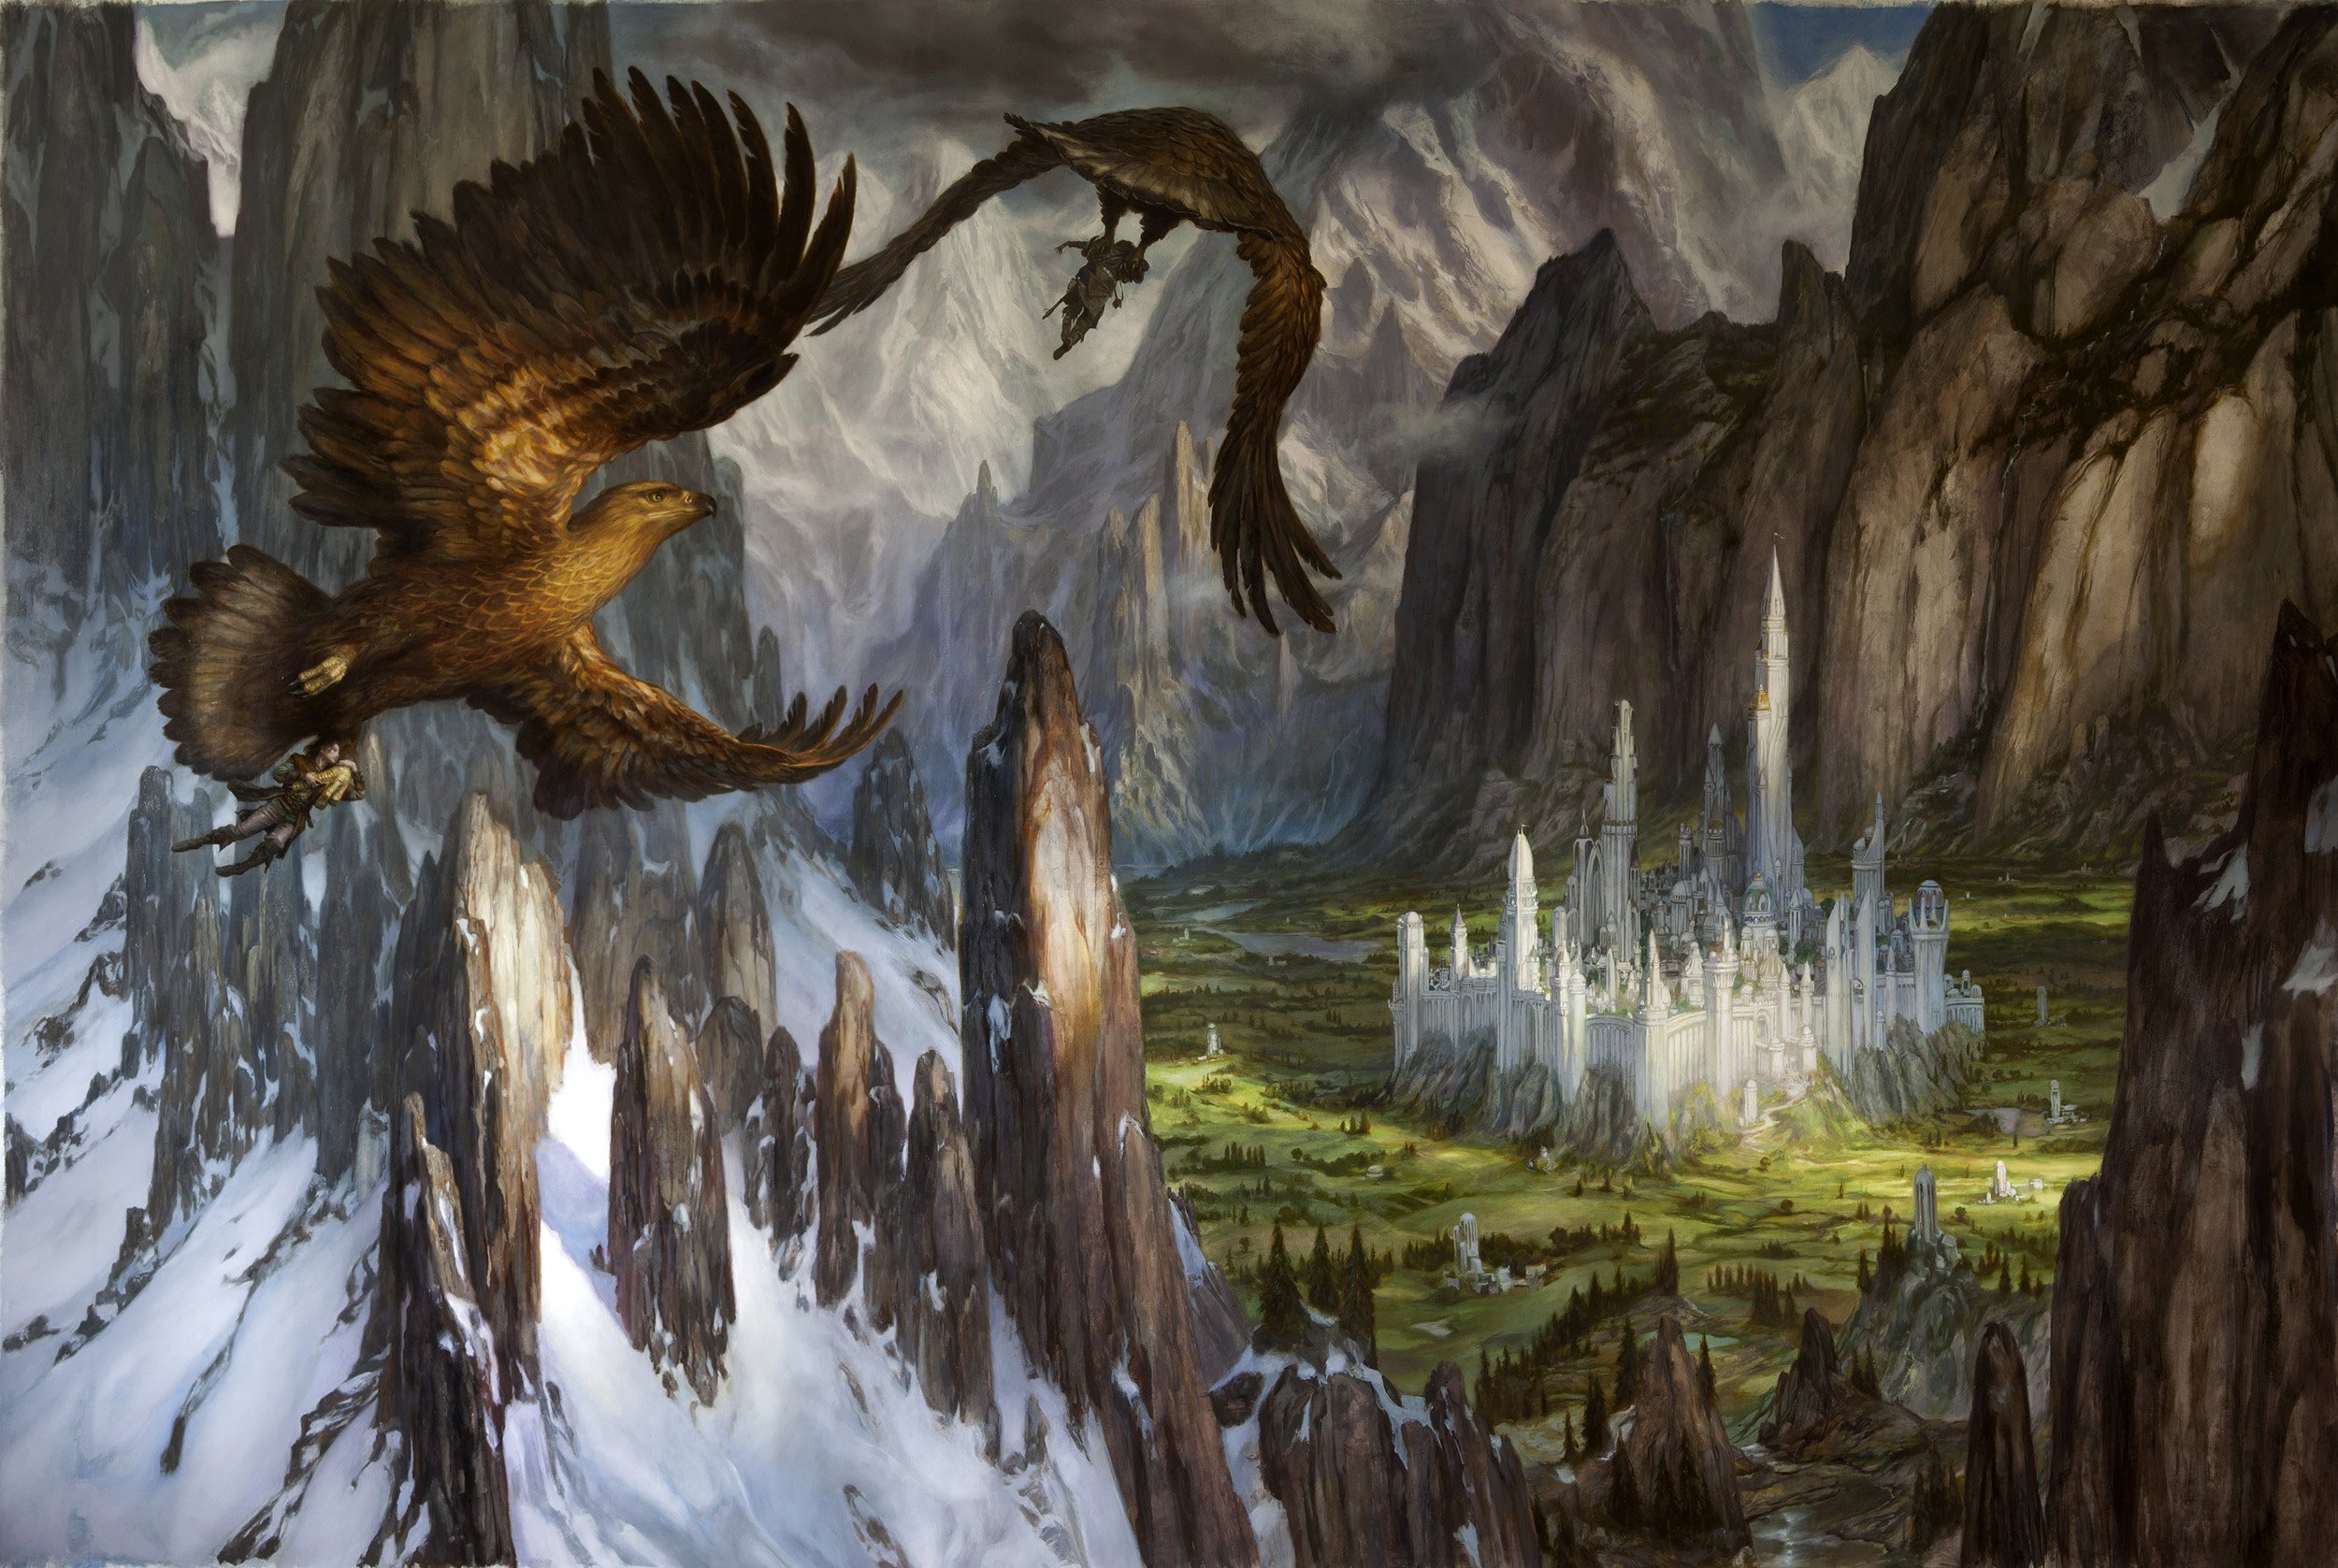 Huor and Hurin Approaching Gondolin
73" x 112"  Oil on Linen 2013
Private commission for The Lord of the Rings by J.R.R. Tolkien